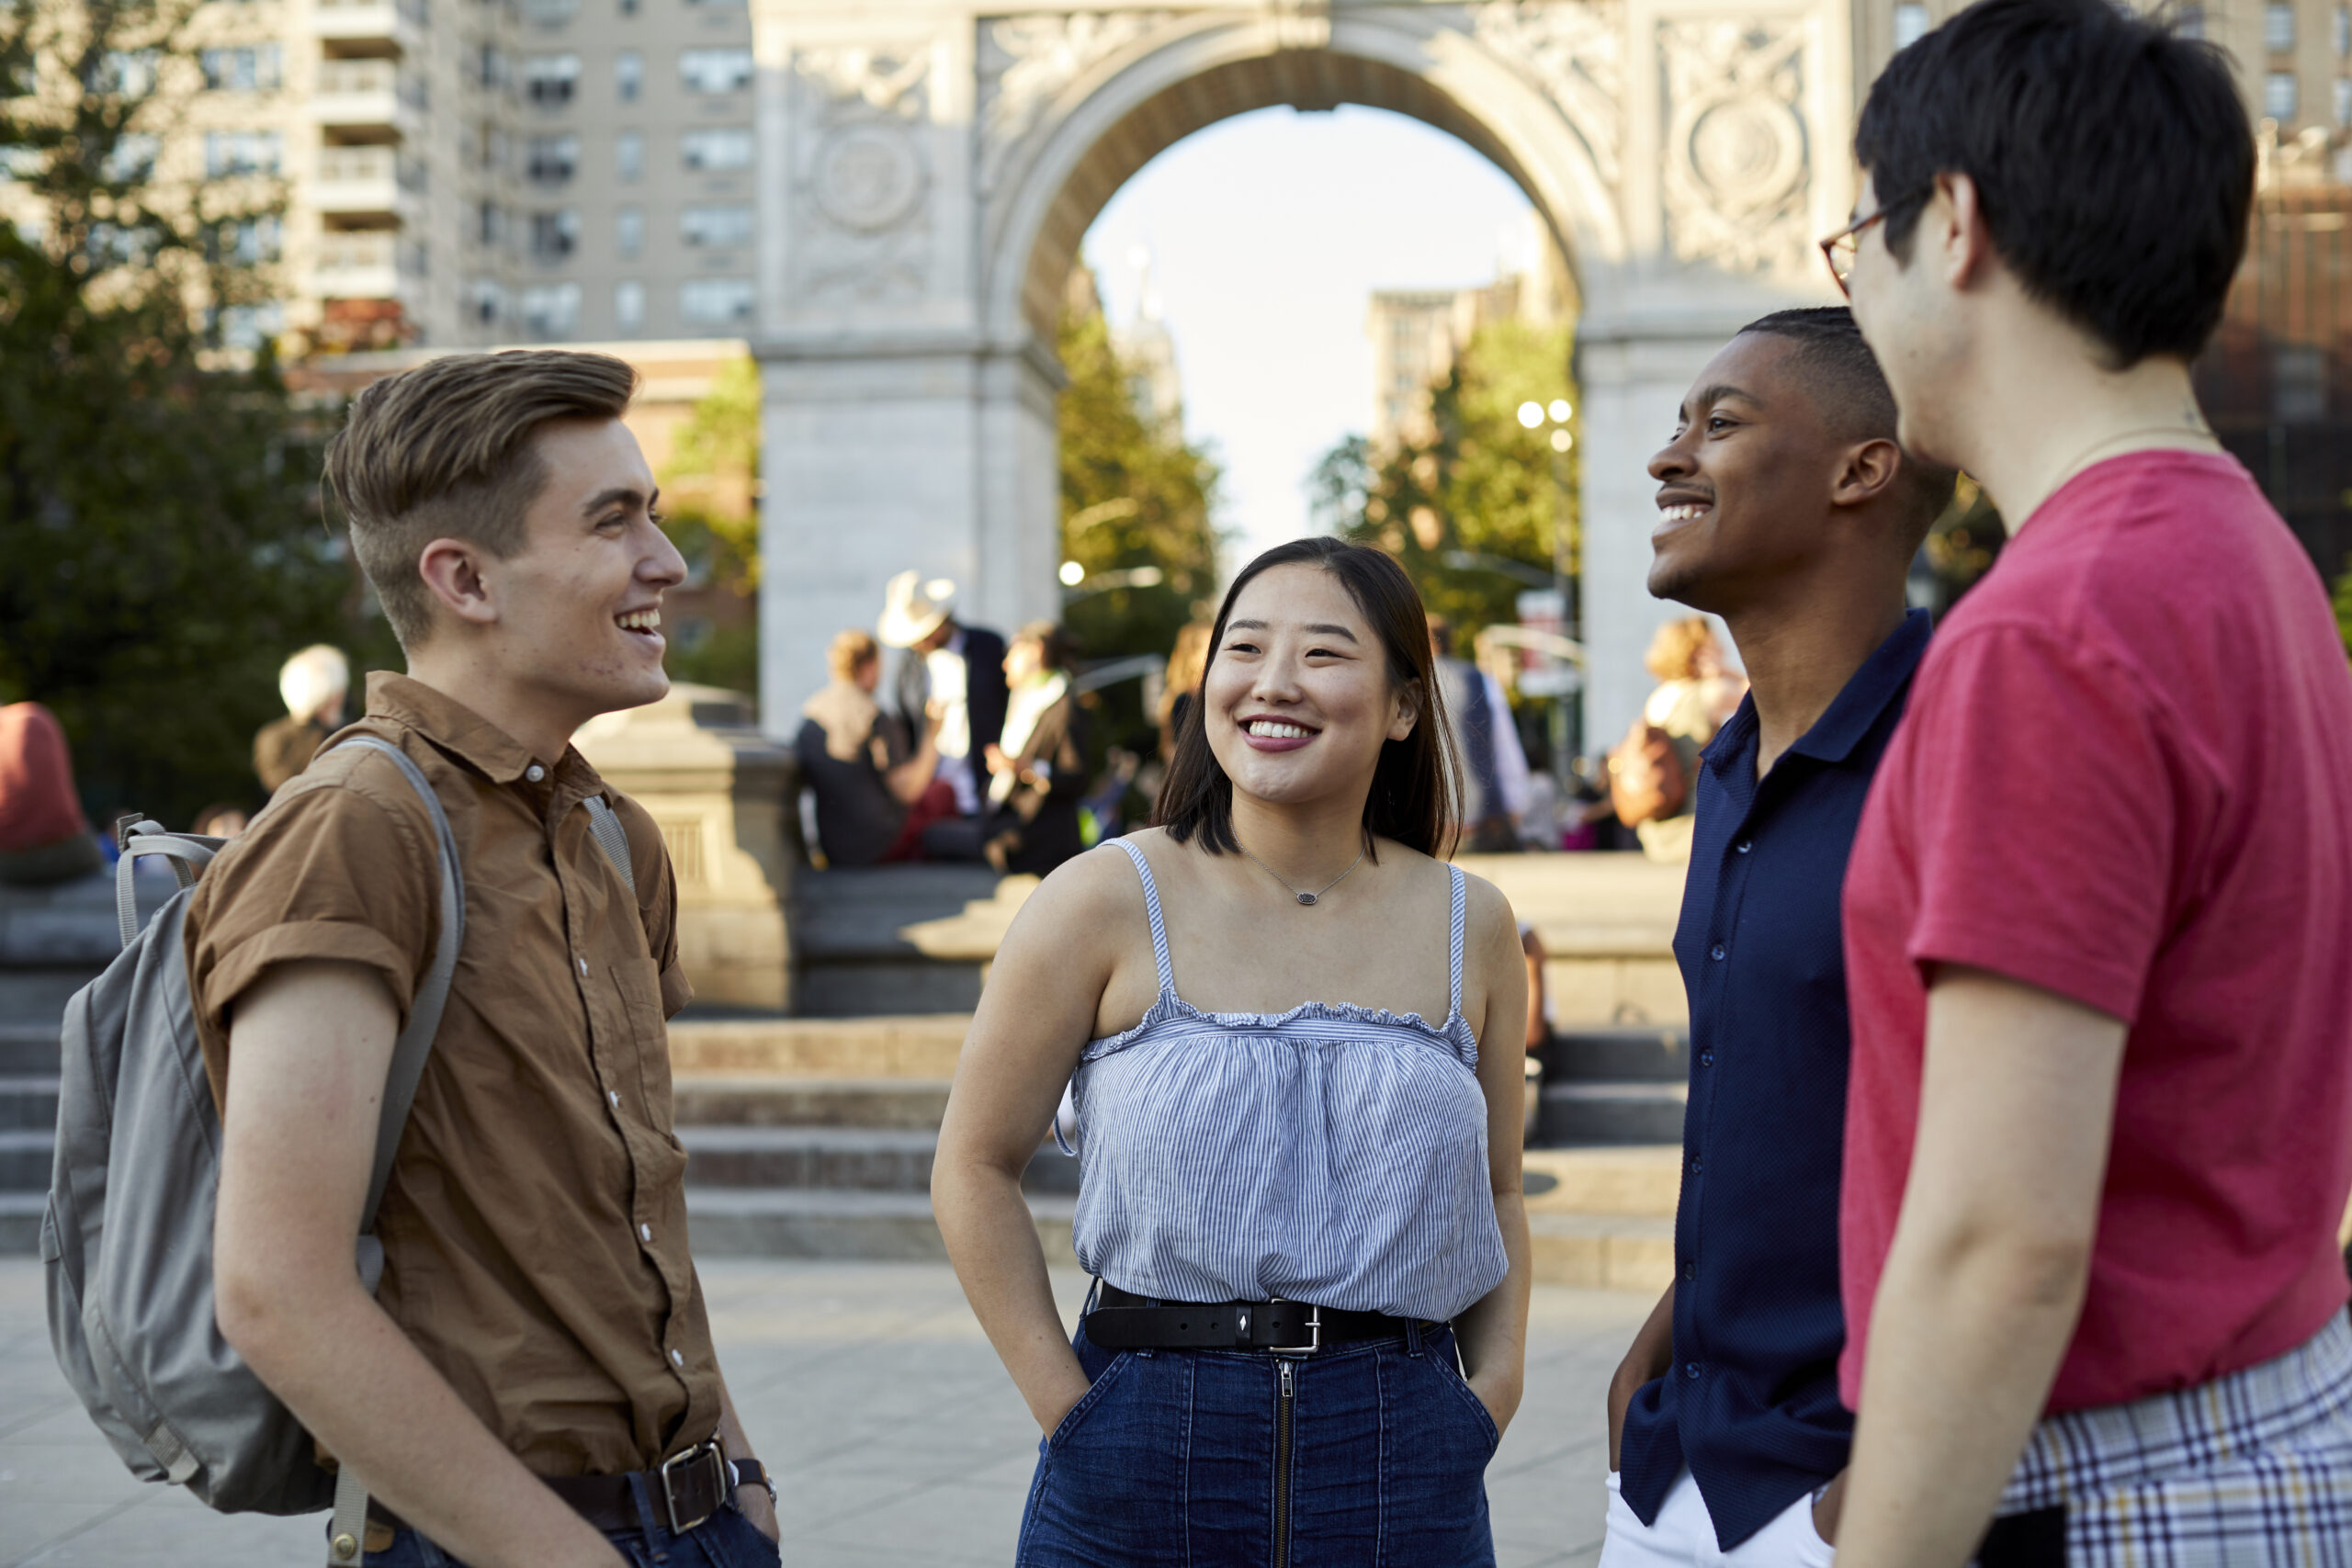 Students smiling together in Washington Square Park.